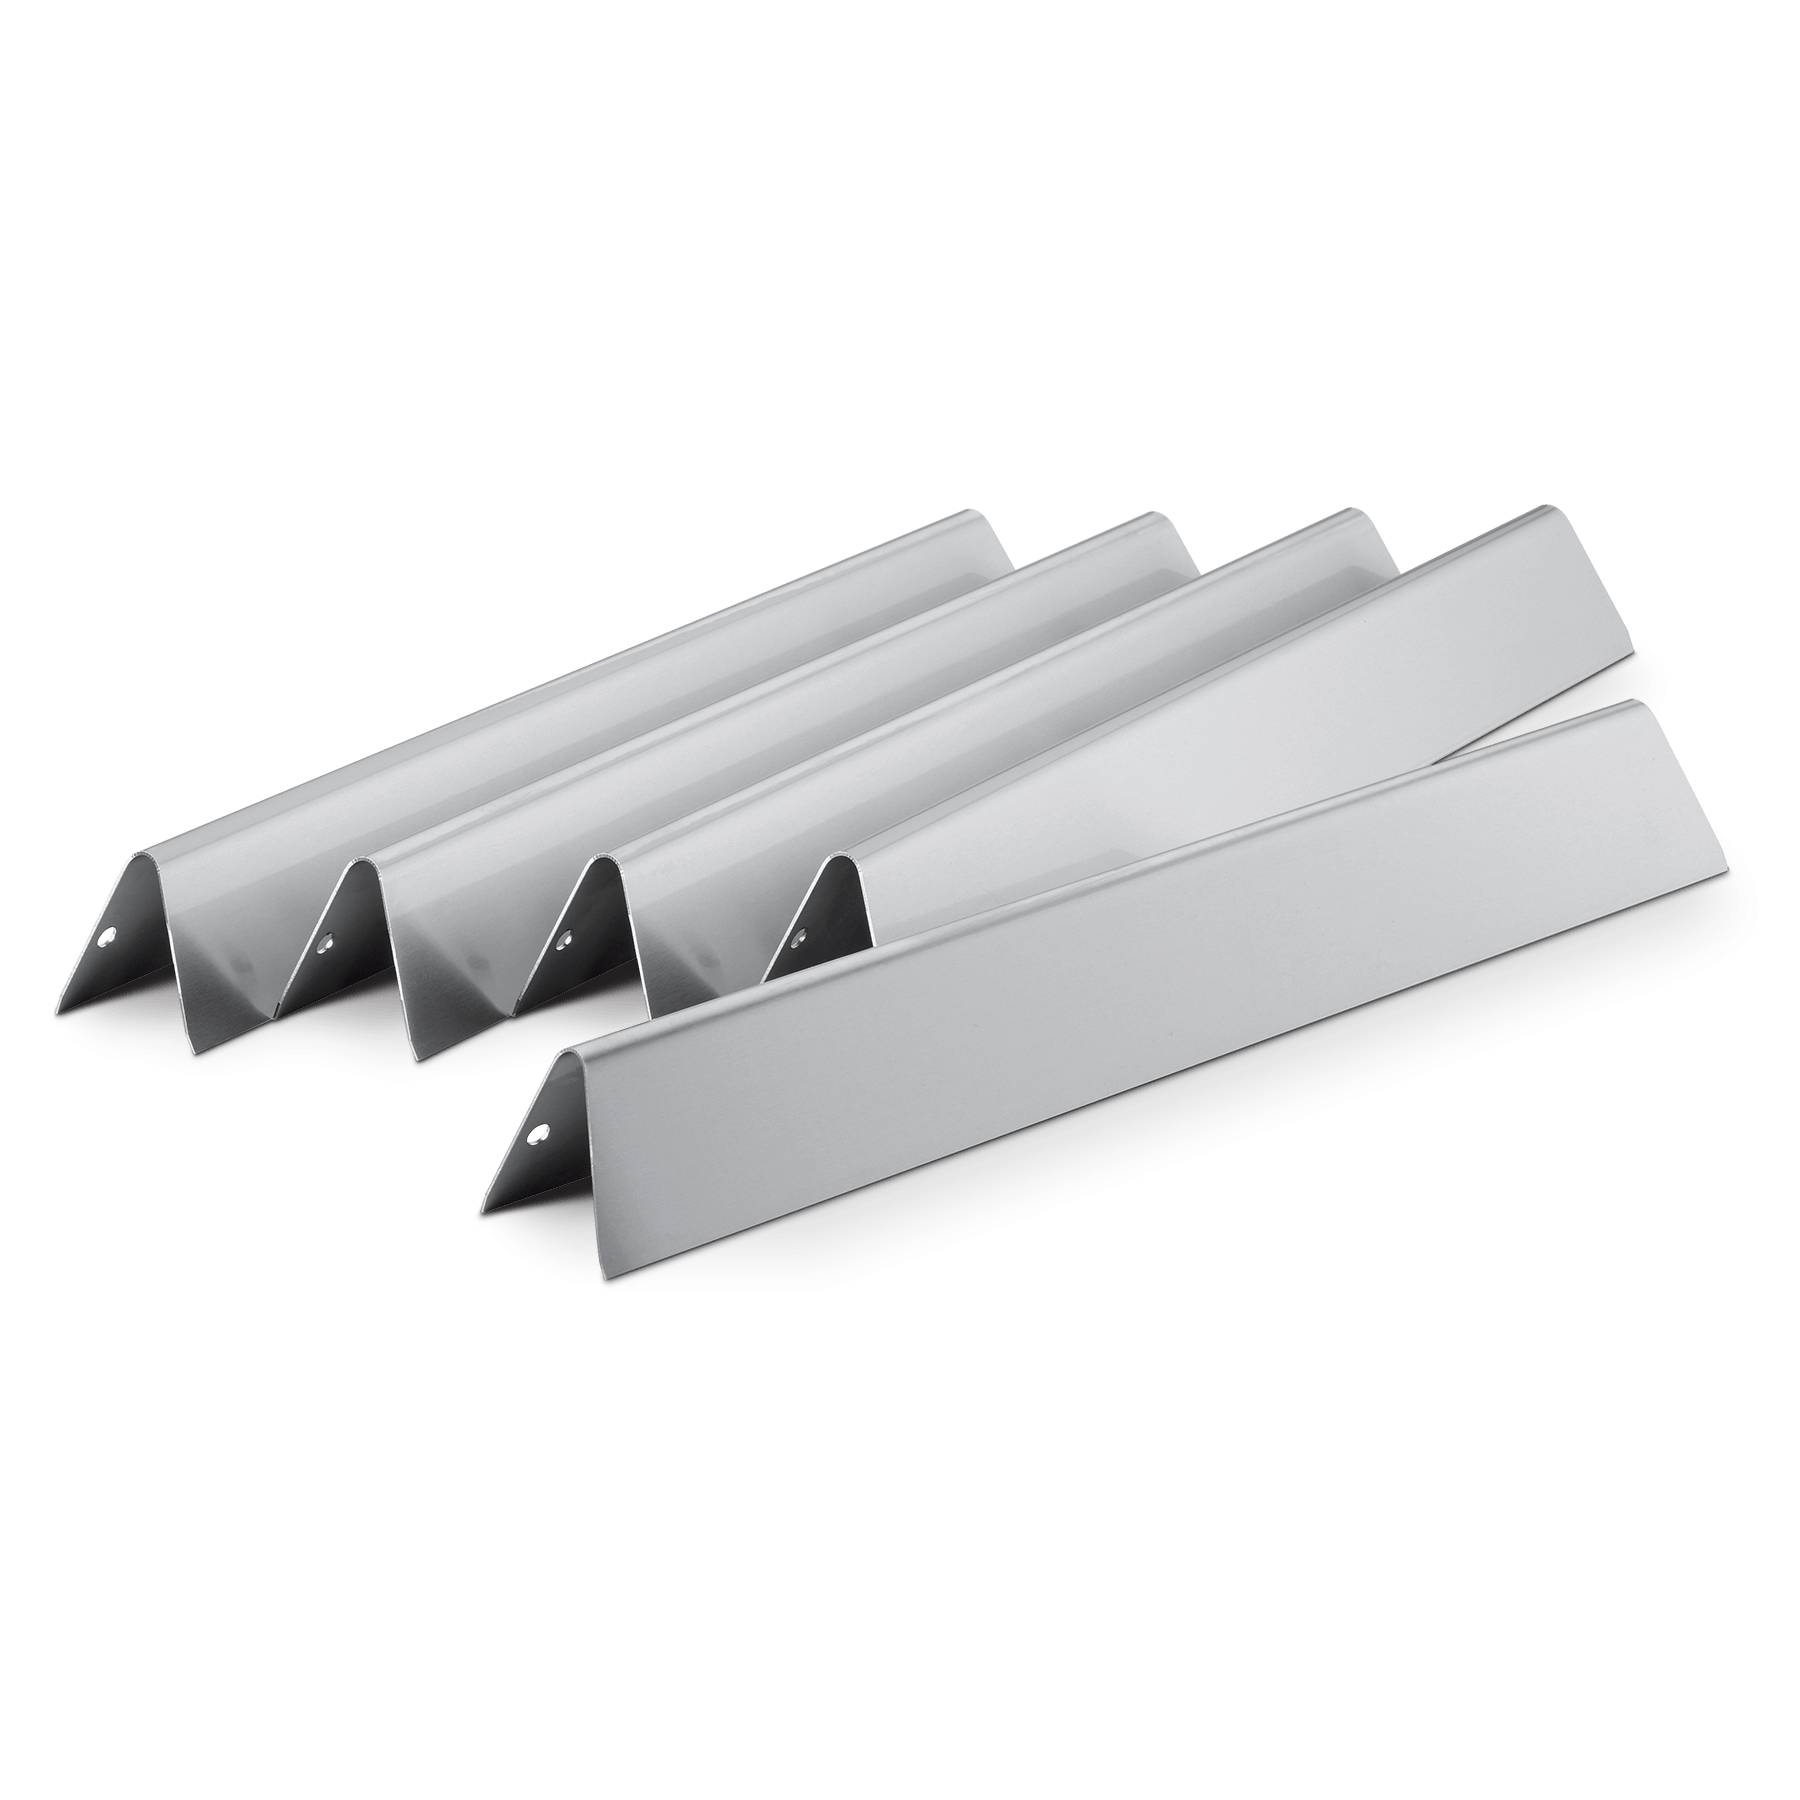 Heat Plate Shield Replaces Weber 7620 7621 17.5 300, Silver Flavor Bars 17.5 for Weber Genesis 300 E310 E320 E330 S310 S330 with Front Control Knobs 